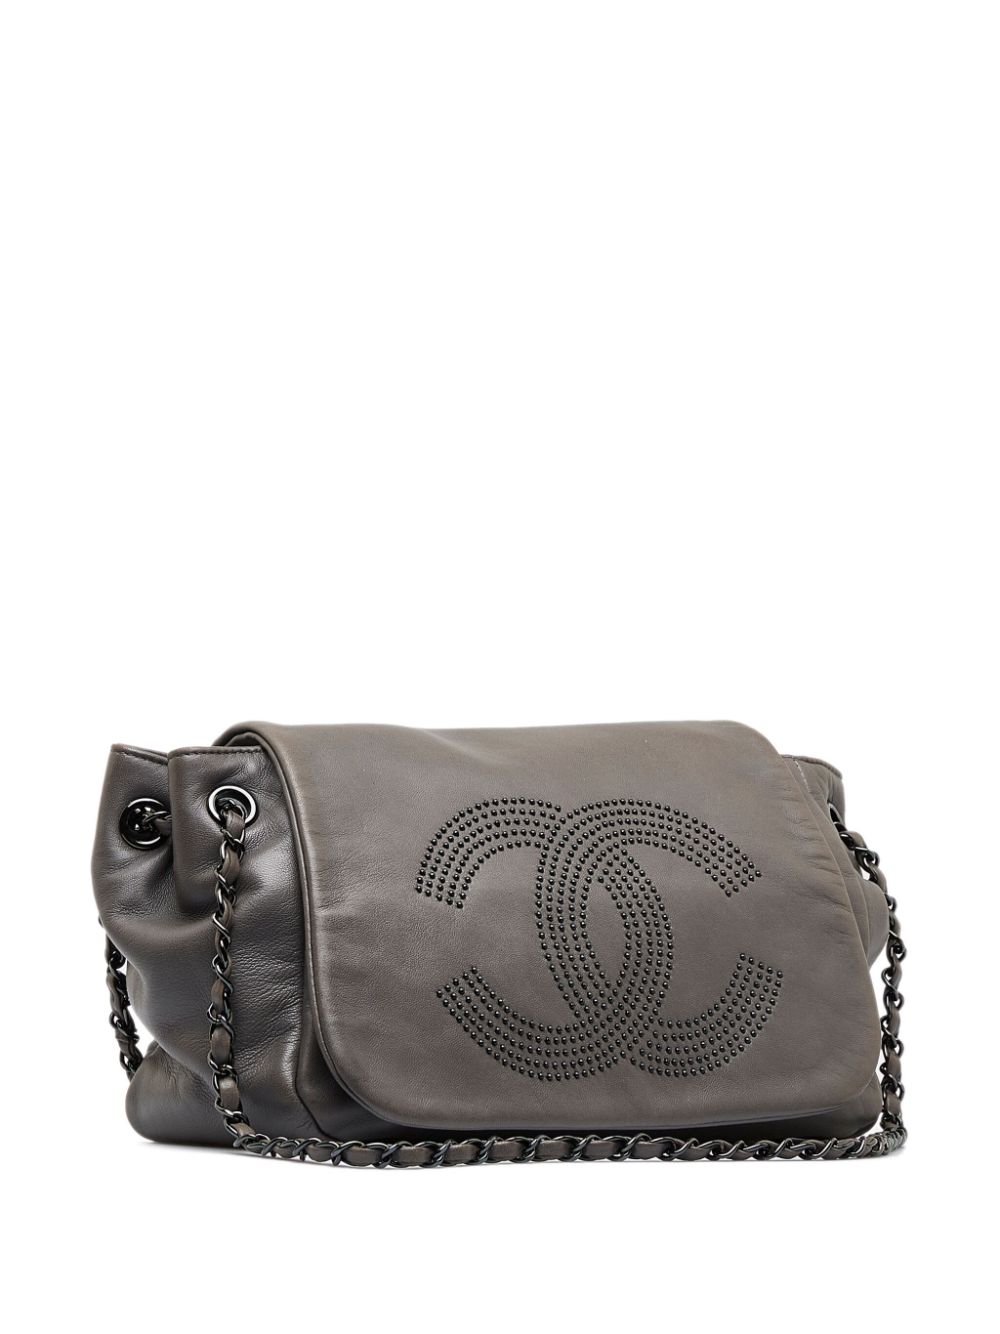 Pre-owned Chanel 2008-2009 Accordion Cc Flap Bag In Grey